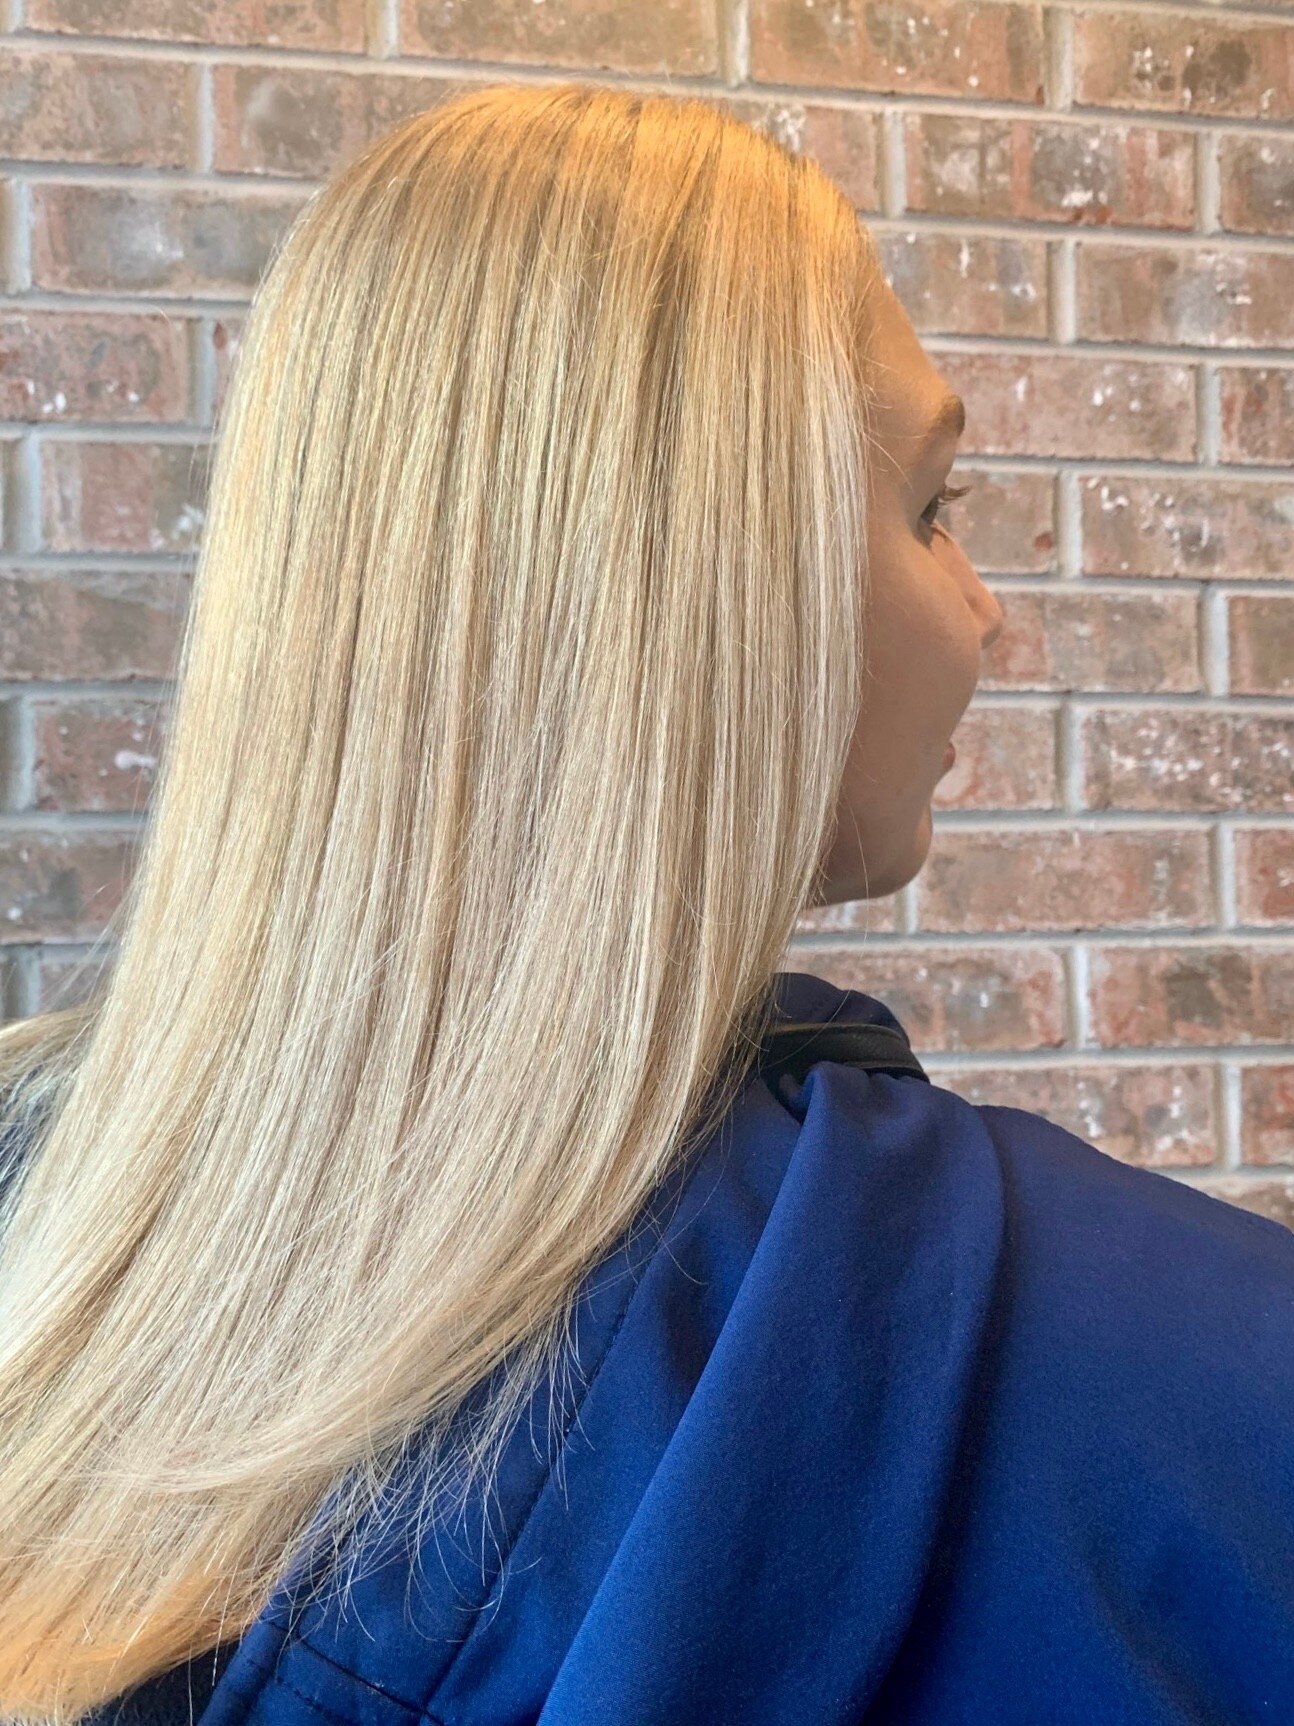 Sleek and shiny ✨ This blonde look is everything!! 😍💛

Hair by Lexi

#fixsalonseattle #blondehair #seattlesalon #seattlehairstylist #redken